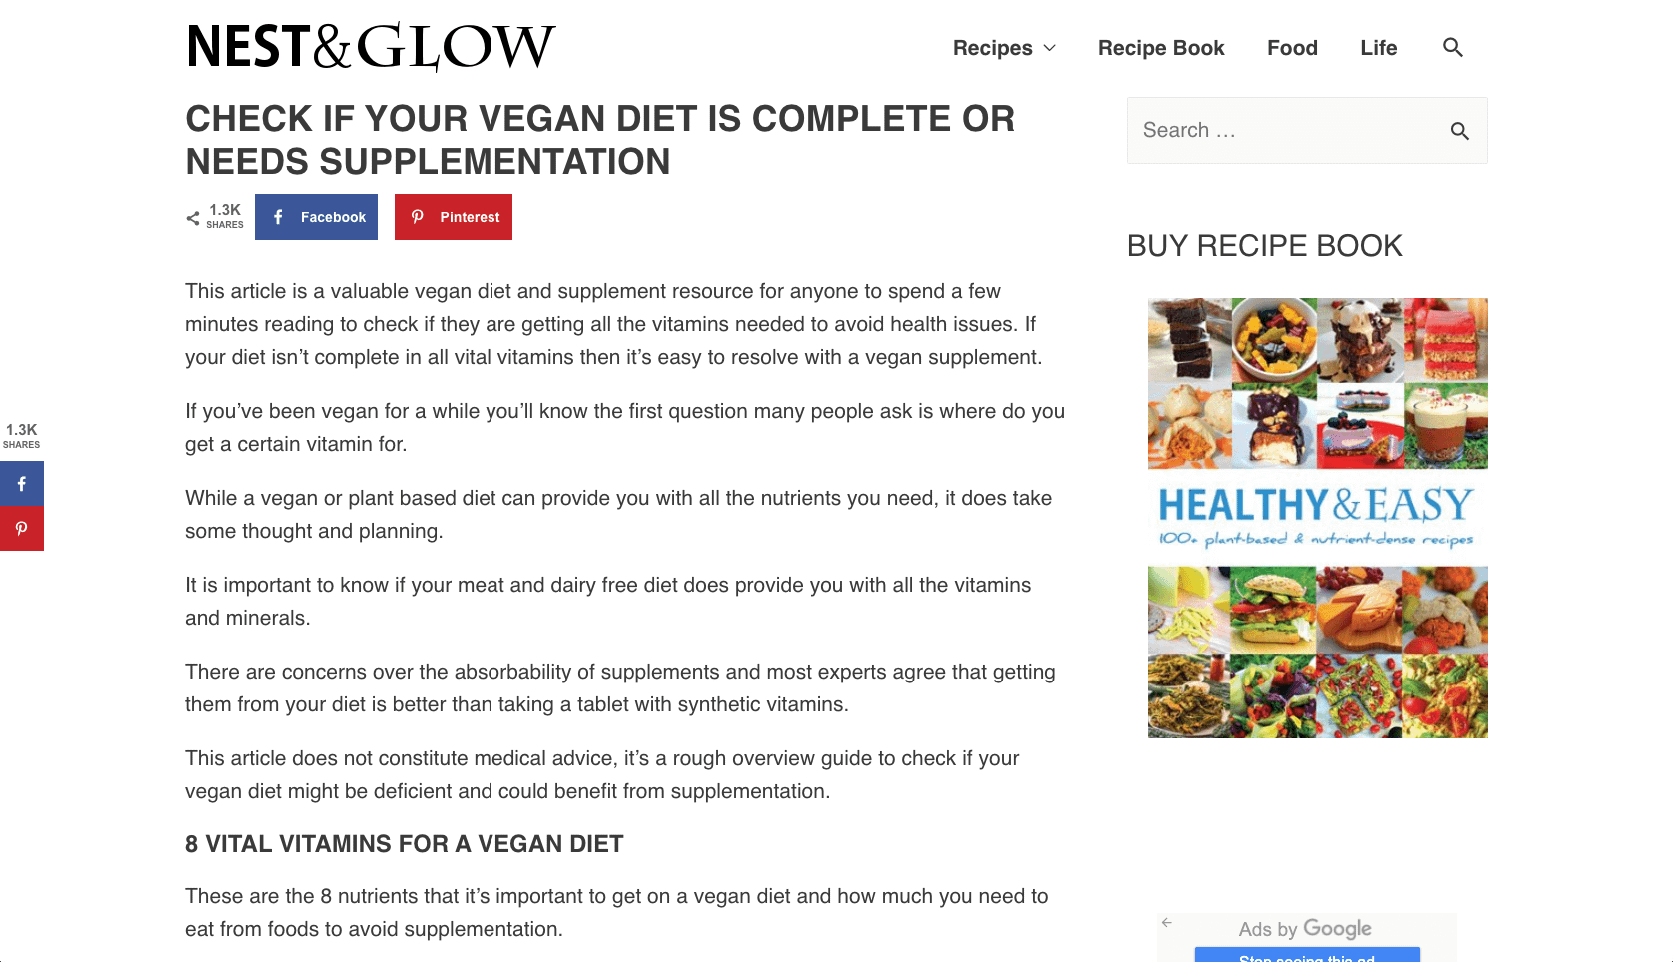 Check if your vegan diet is complete or needs supplementation